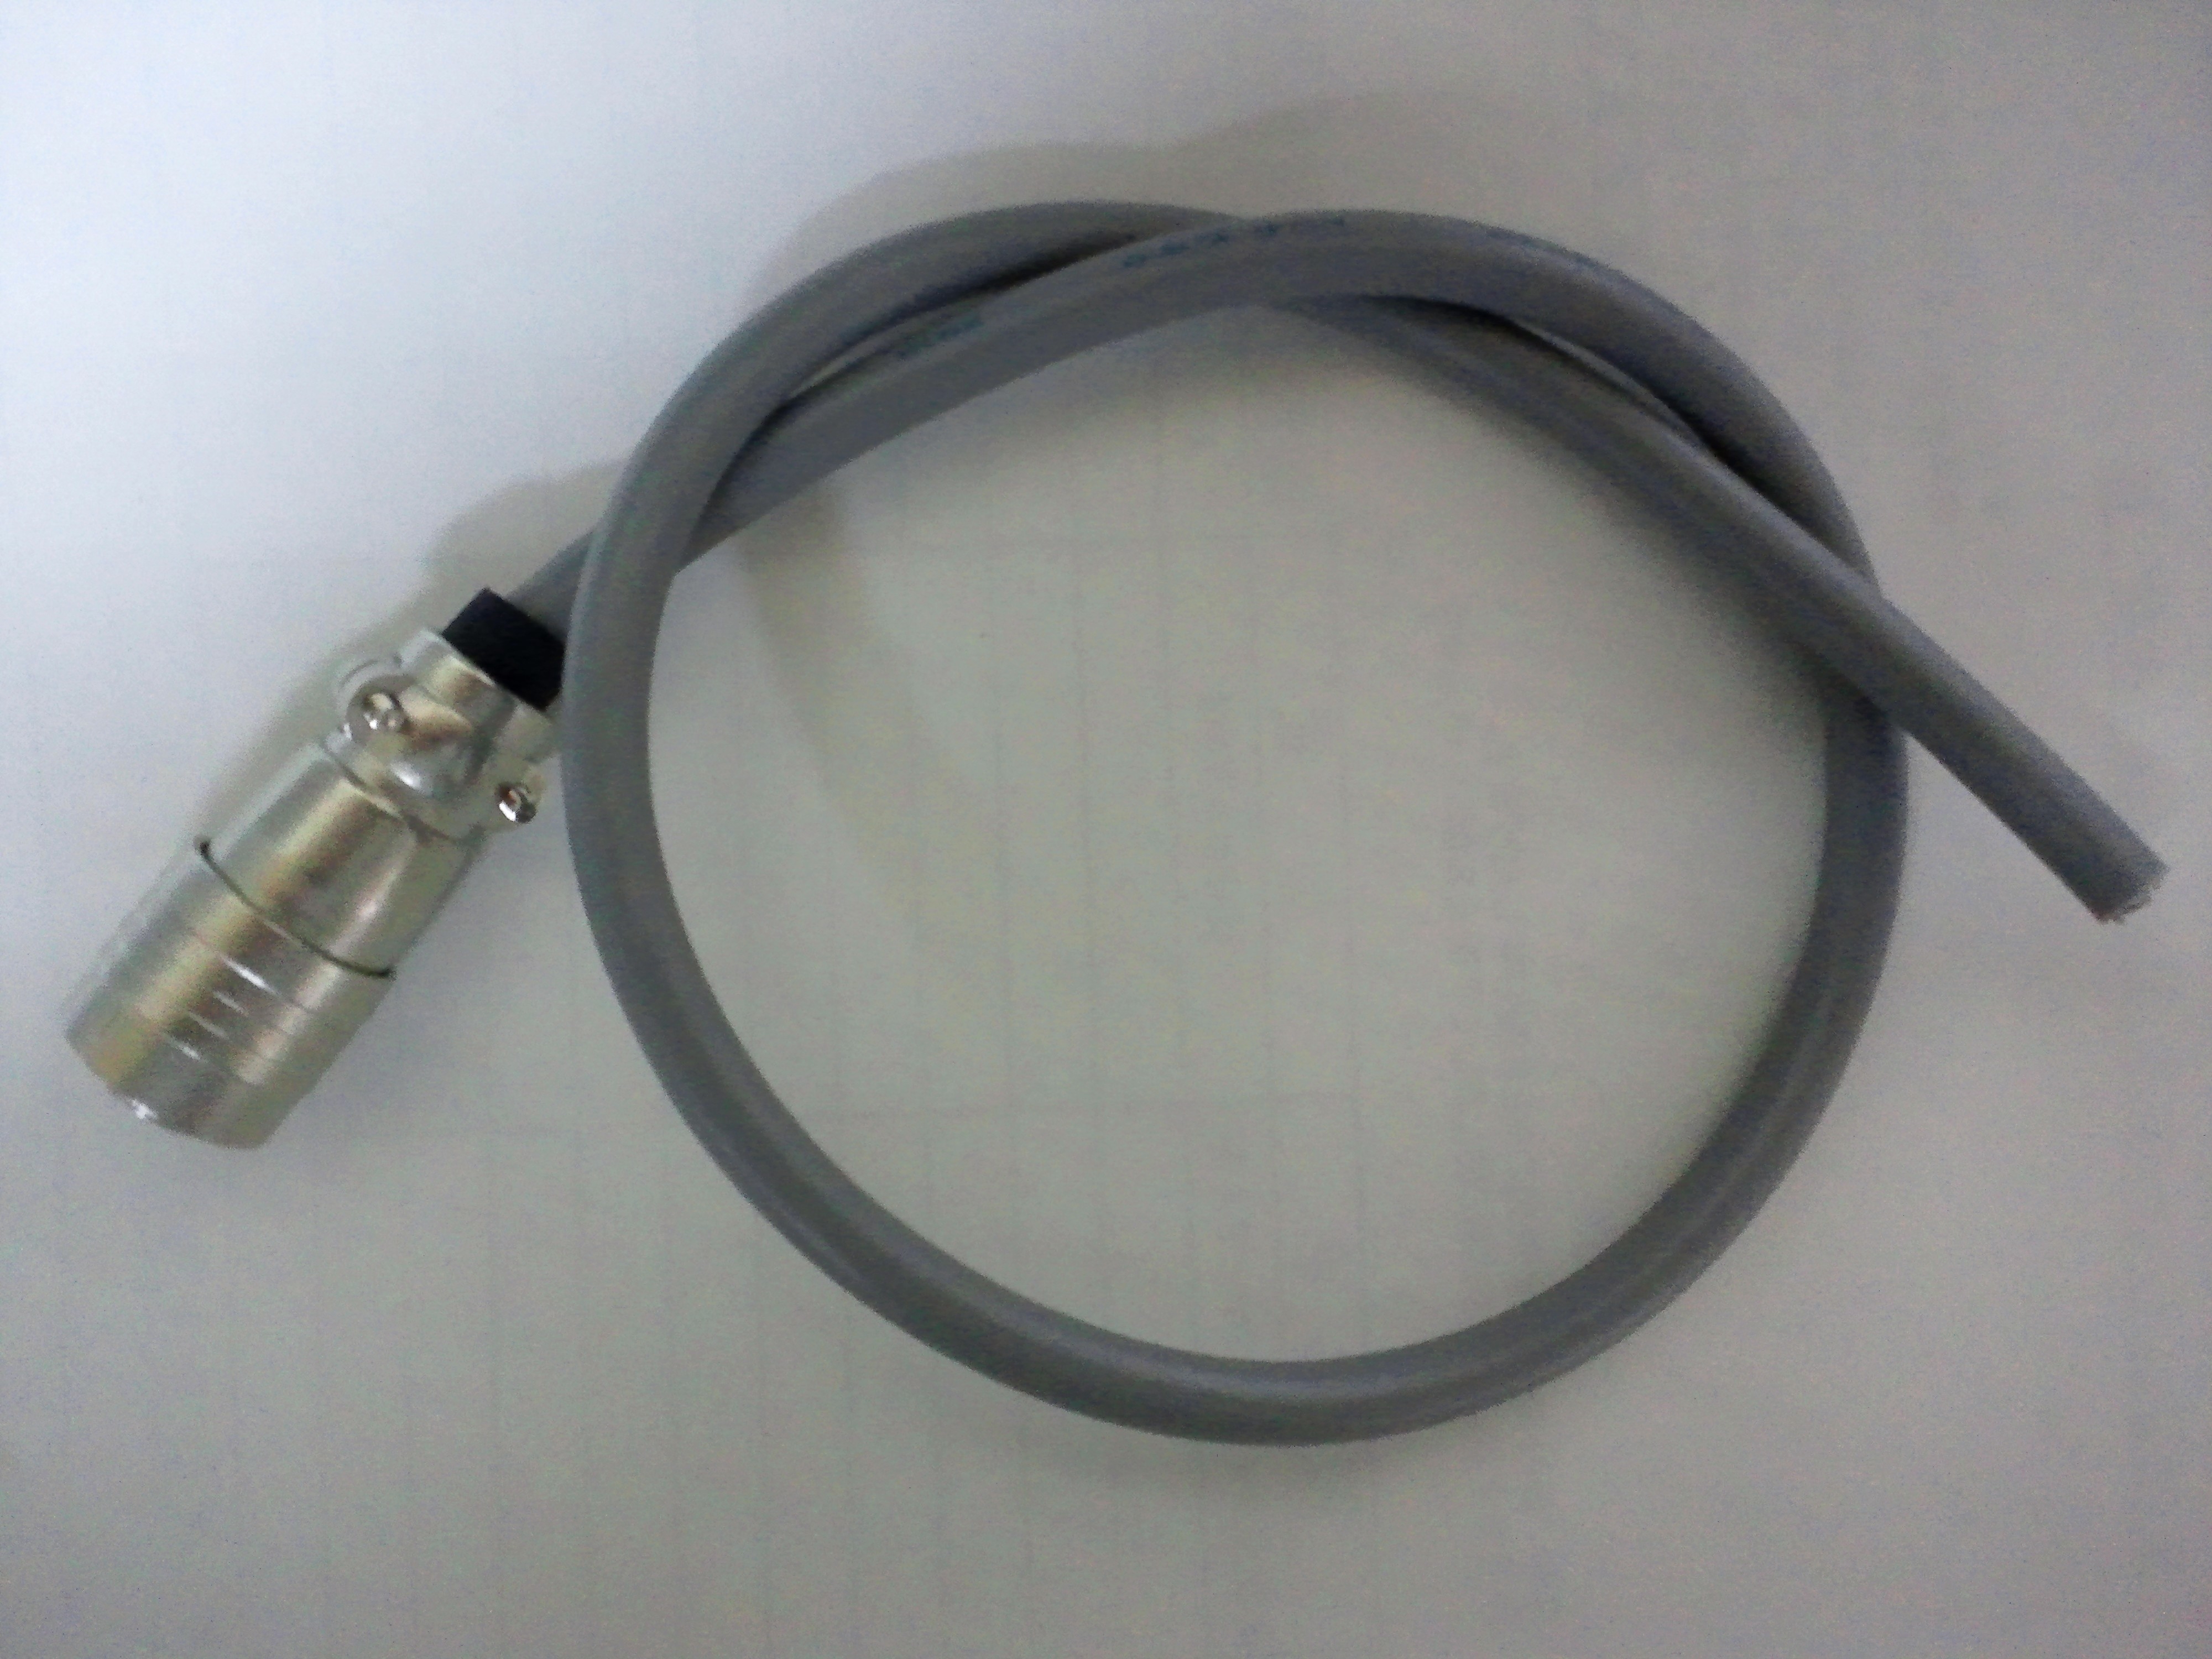 http://www.cable-harness-ex.com/case/PRC.JPG